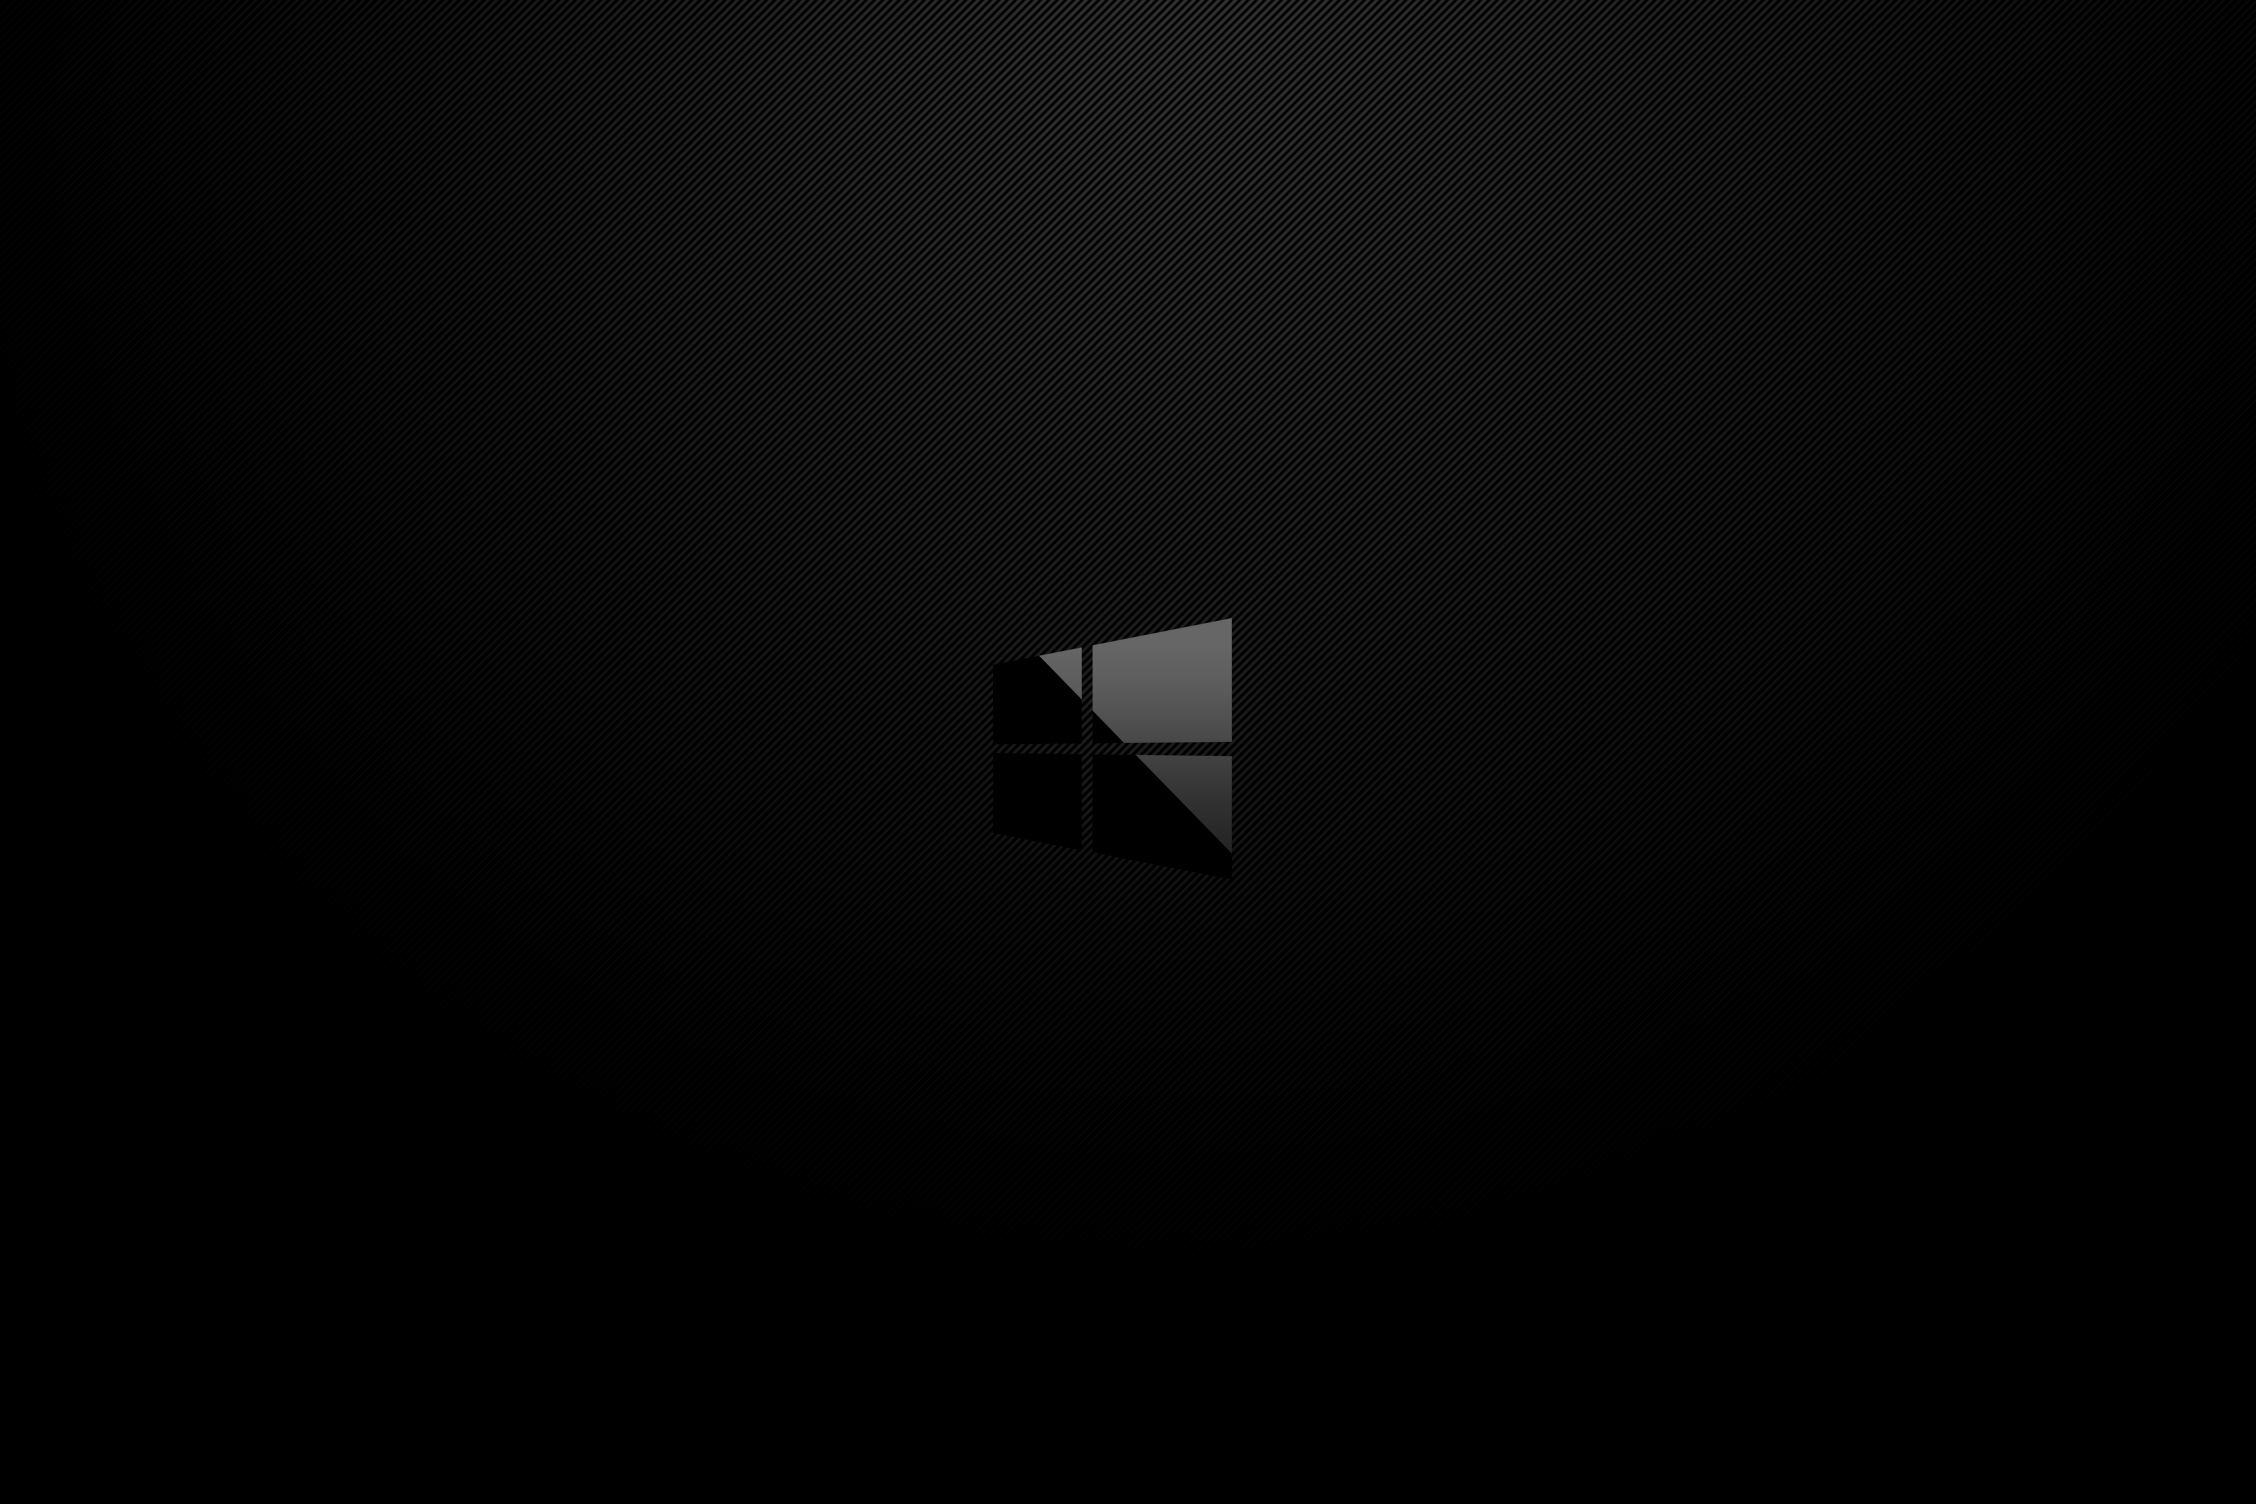 Made a dark minimalist wallpaper for my Surface Laptop. Feel free